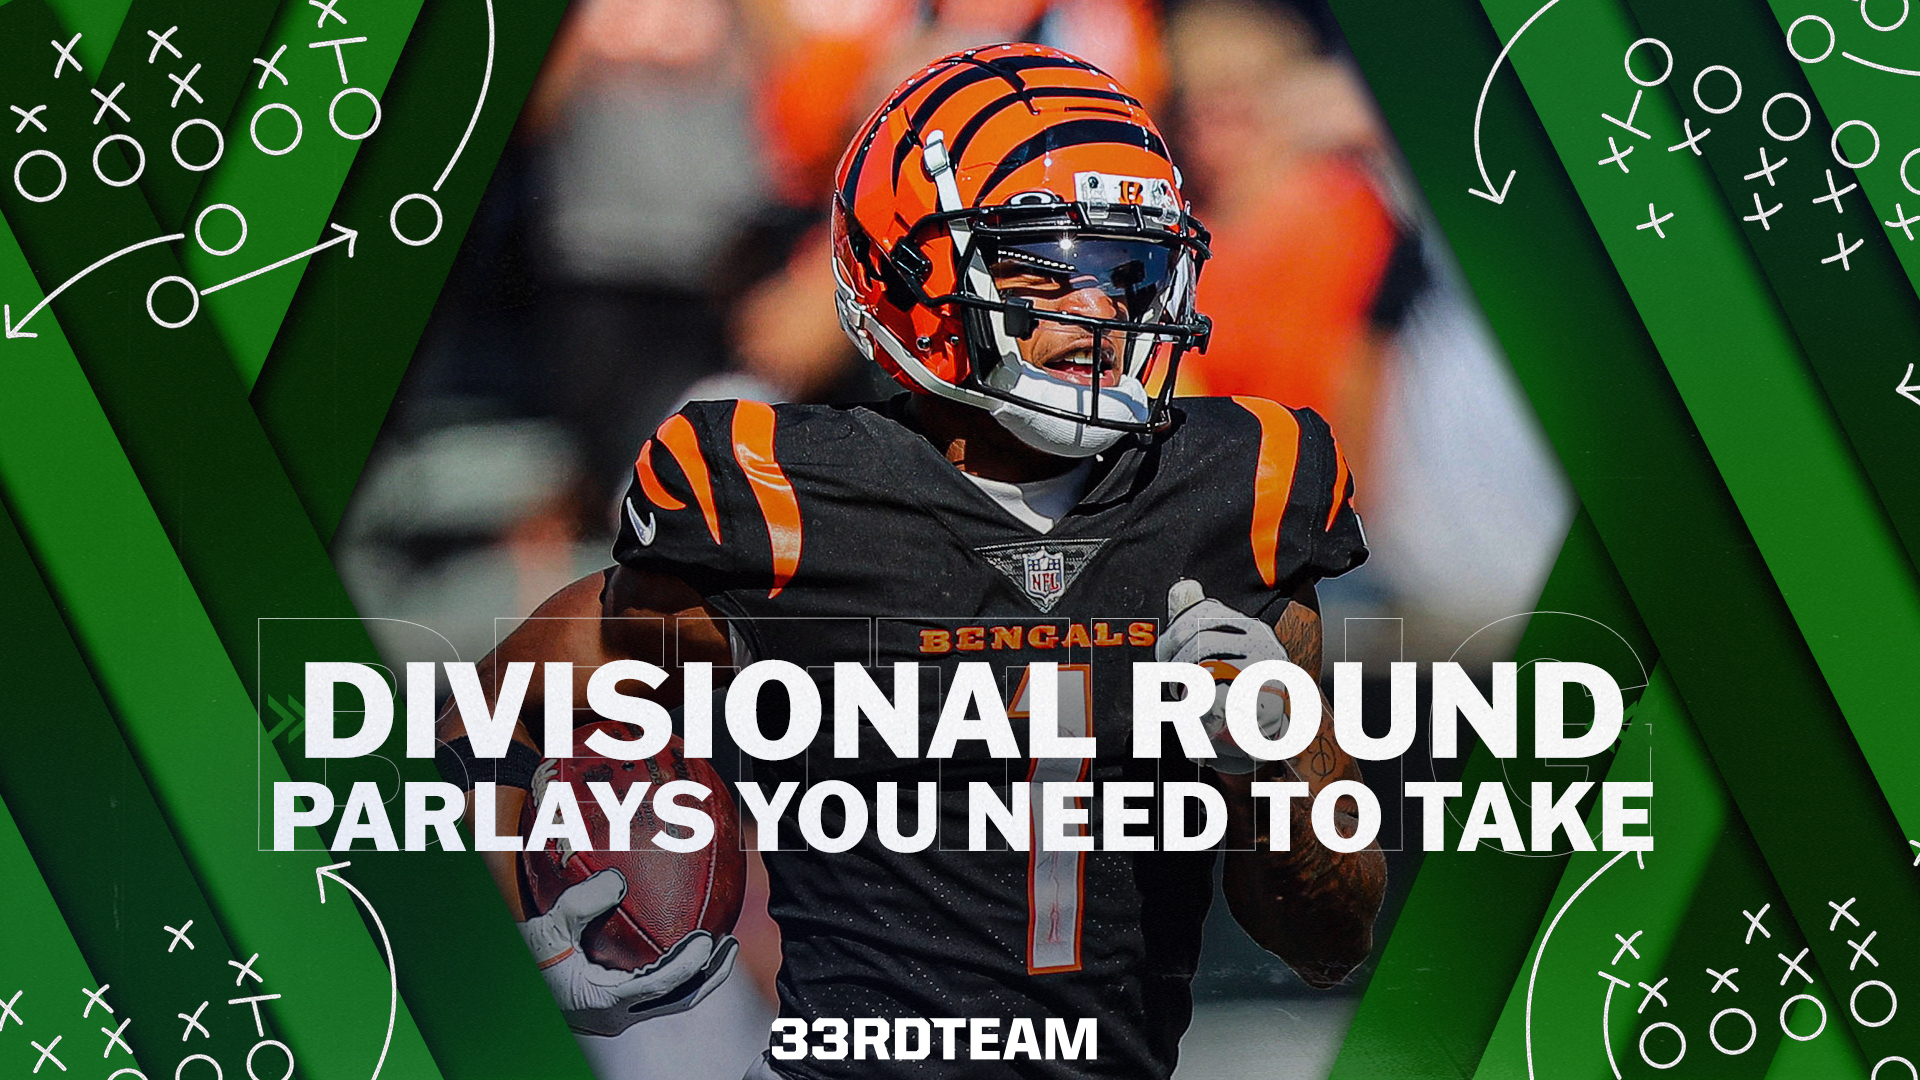 Two Divisional Round Parlays To Take, Including Bengals Keeping it Close